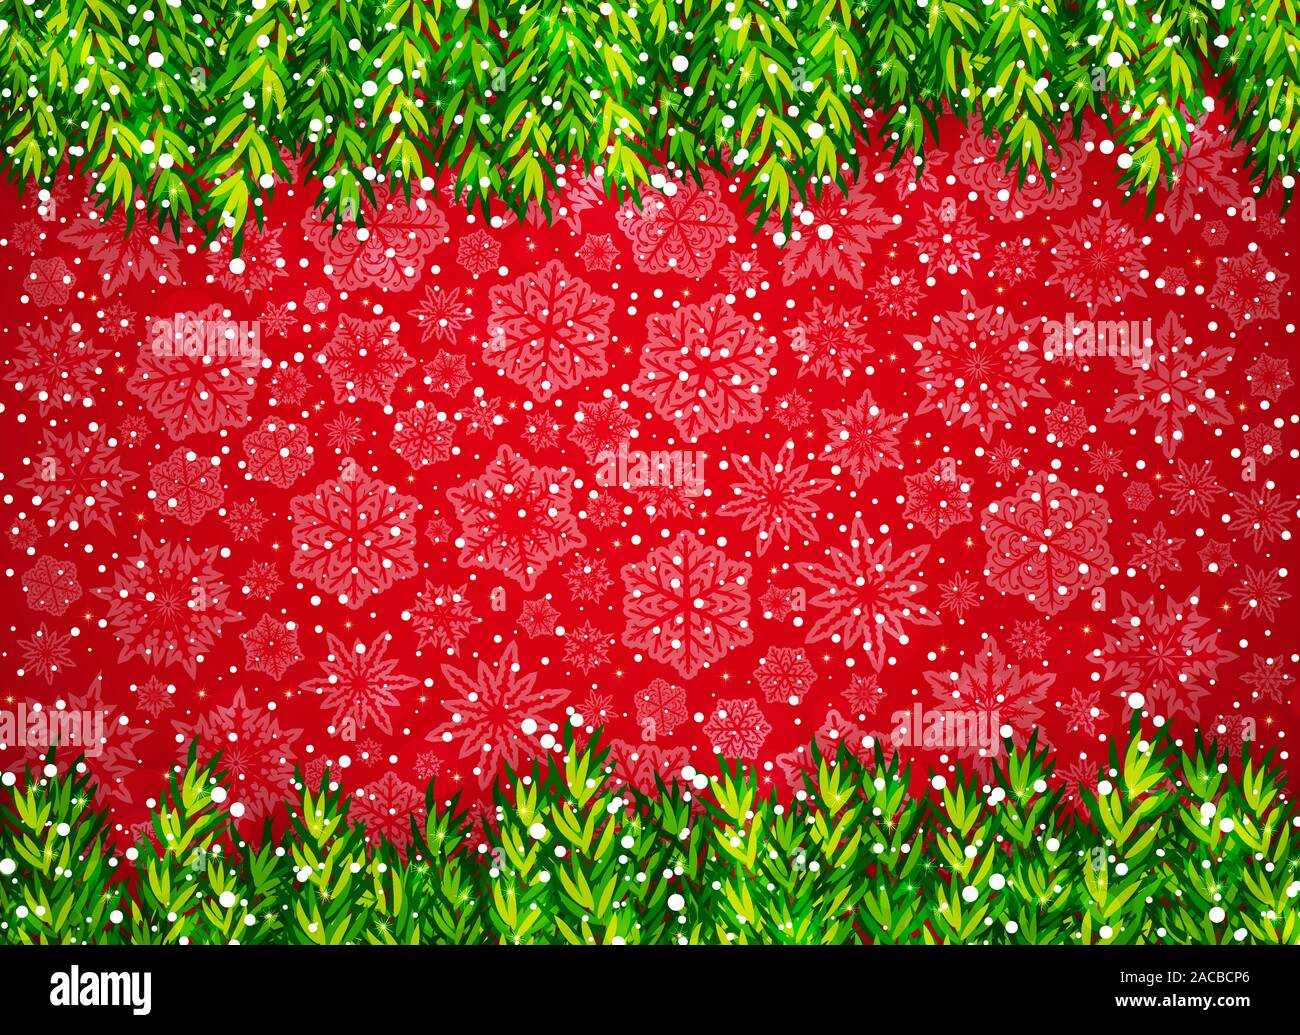 Winter background with Christmas tree branches, snow and snowflakes on red Stock Vector